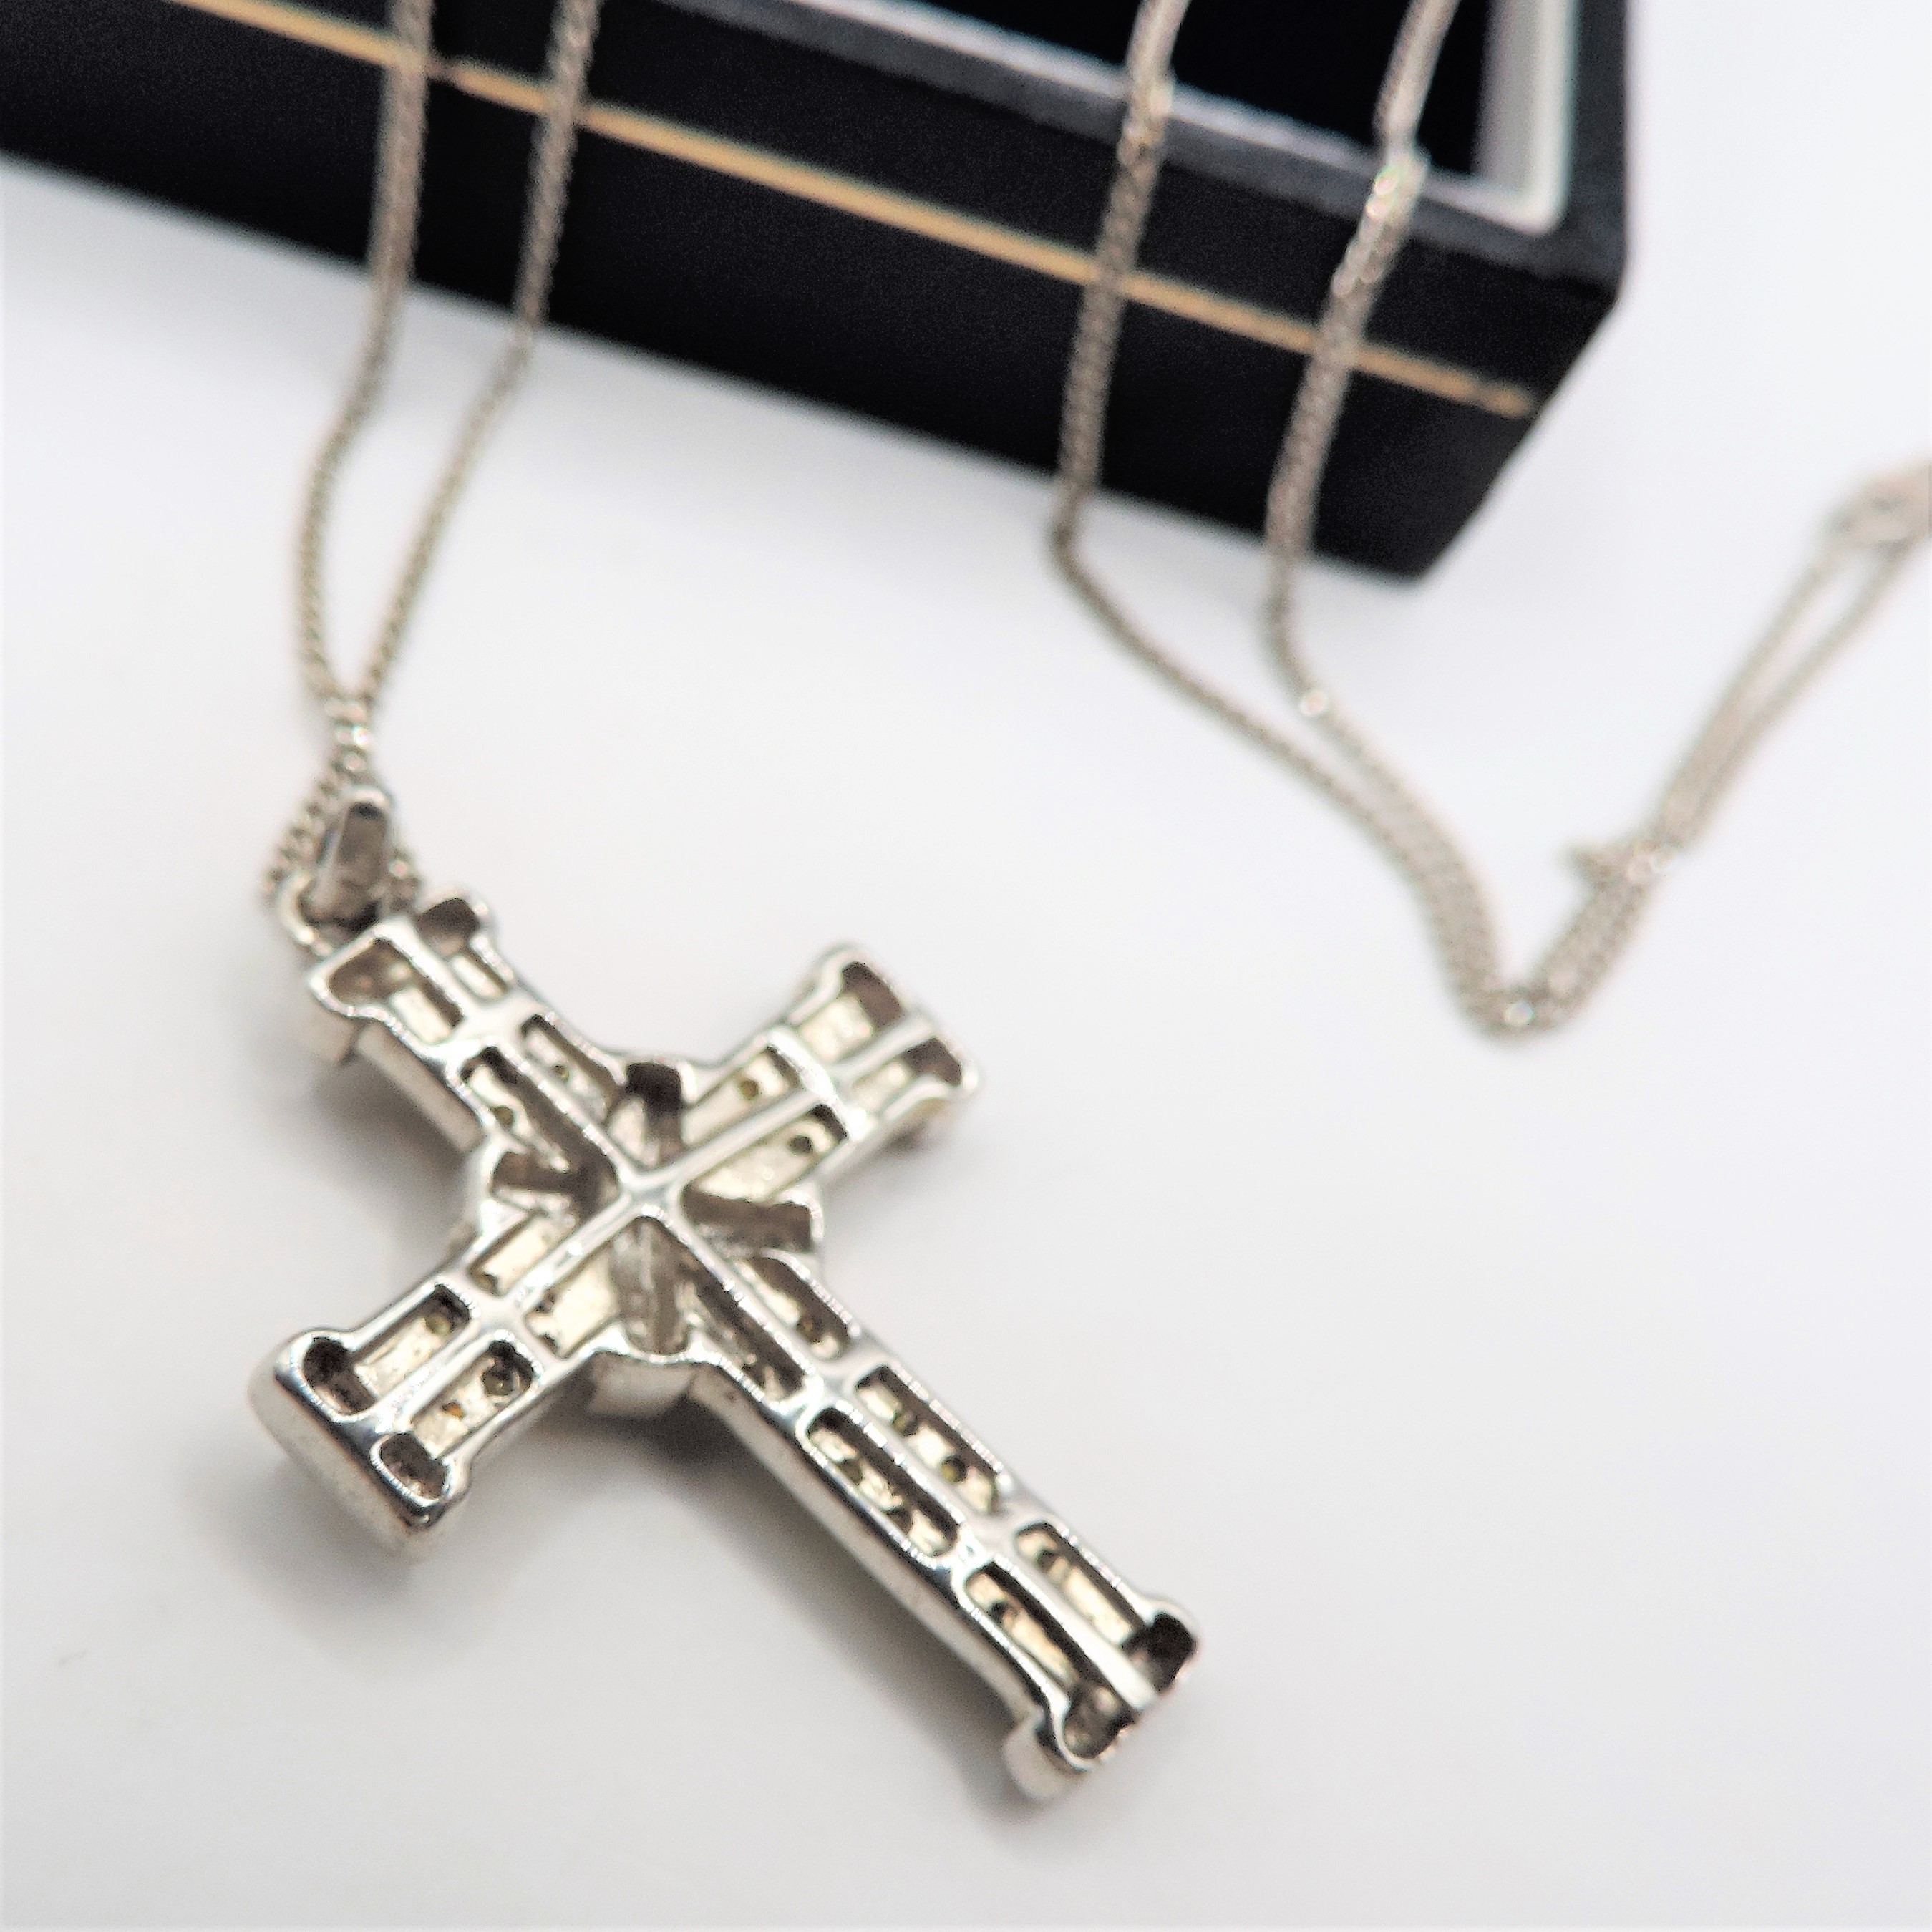 Platinum on Sterling Silver Yellow Diamond Cross Pendant Necklace 'New' with Gift Box - Image 3 of 3